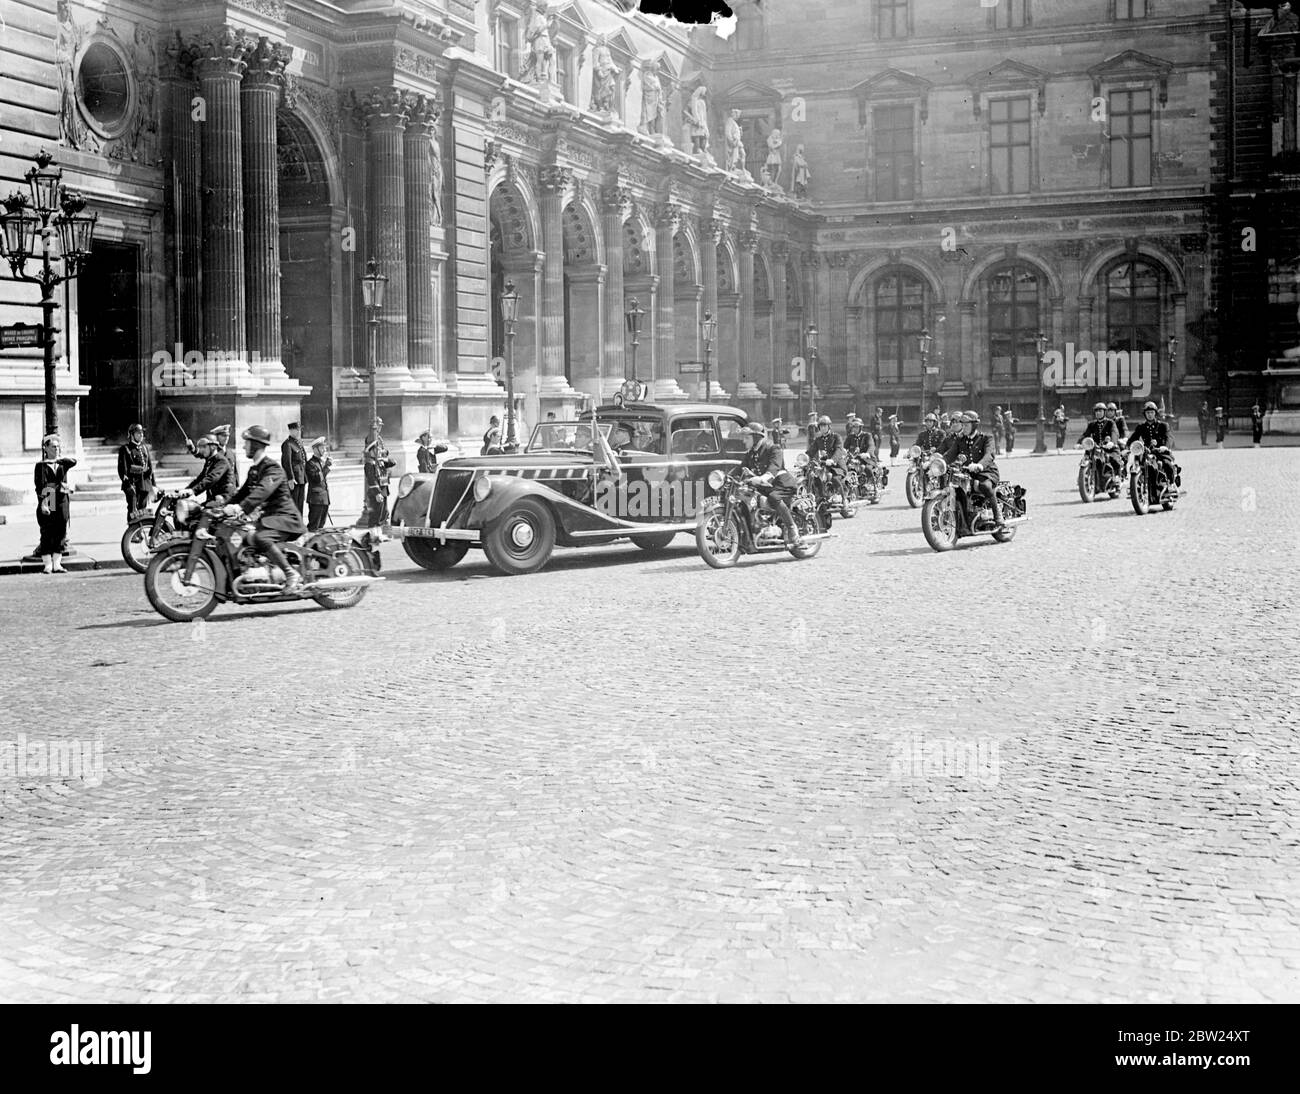 King and Queen visit British art exhibition at the Louvre. Driving in a close car with an escort of motorcycle police, the King and Queen visited the Exhibition of British Art at the Louvre in Paris. They were accompanied by Pres and Mme Lebrun. Photo shows, the King and Queen arriving at the louvre with their escort. 20 July 1938 Stock Photo